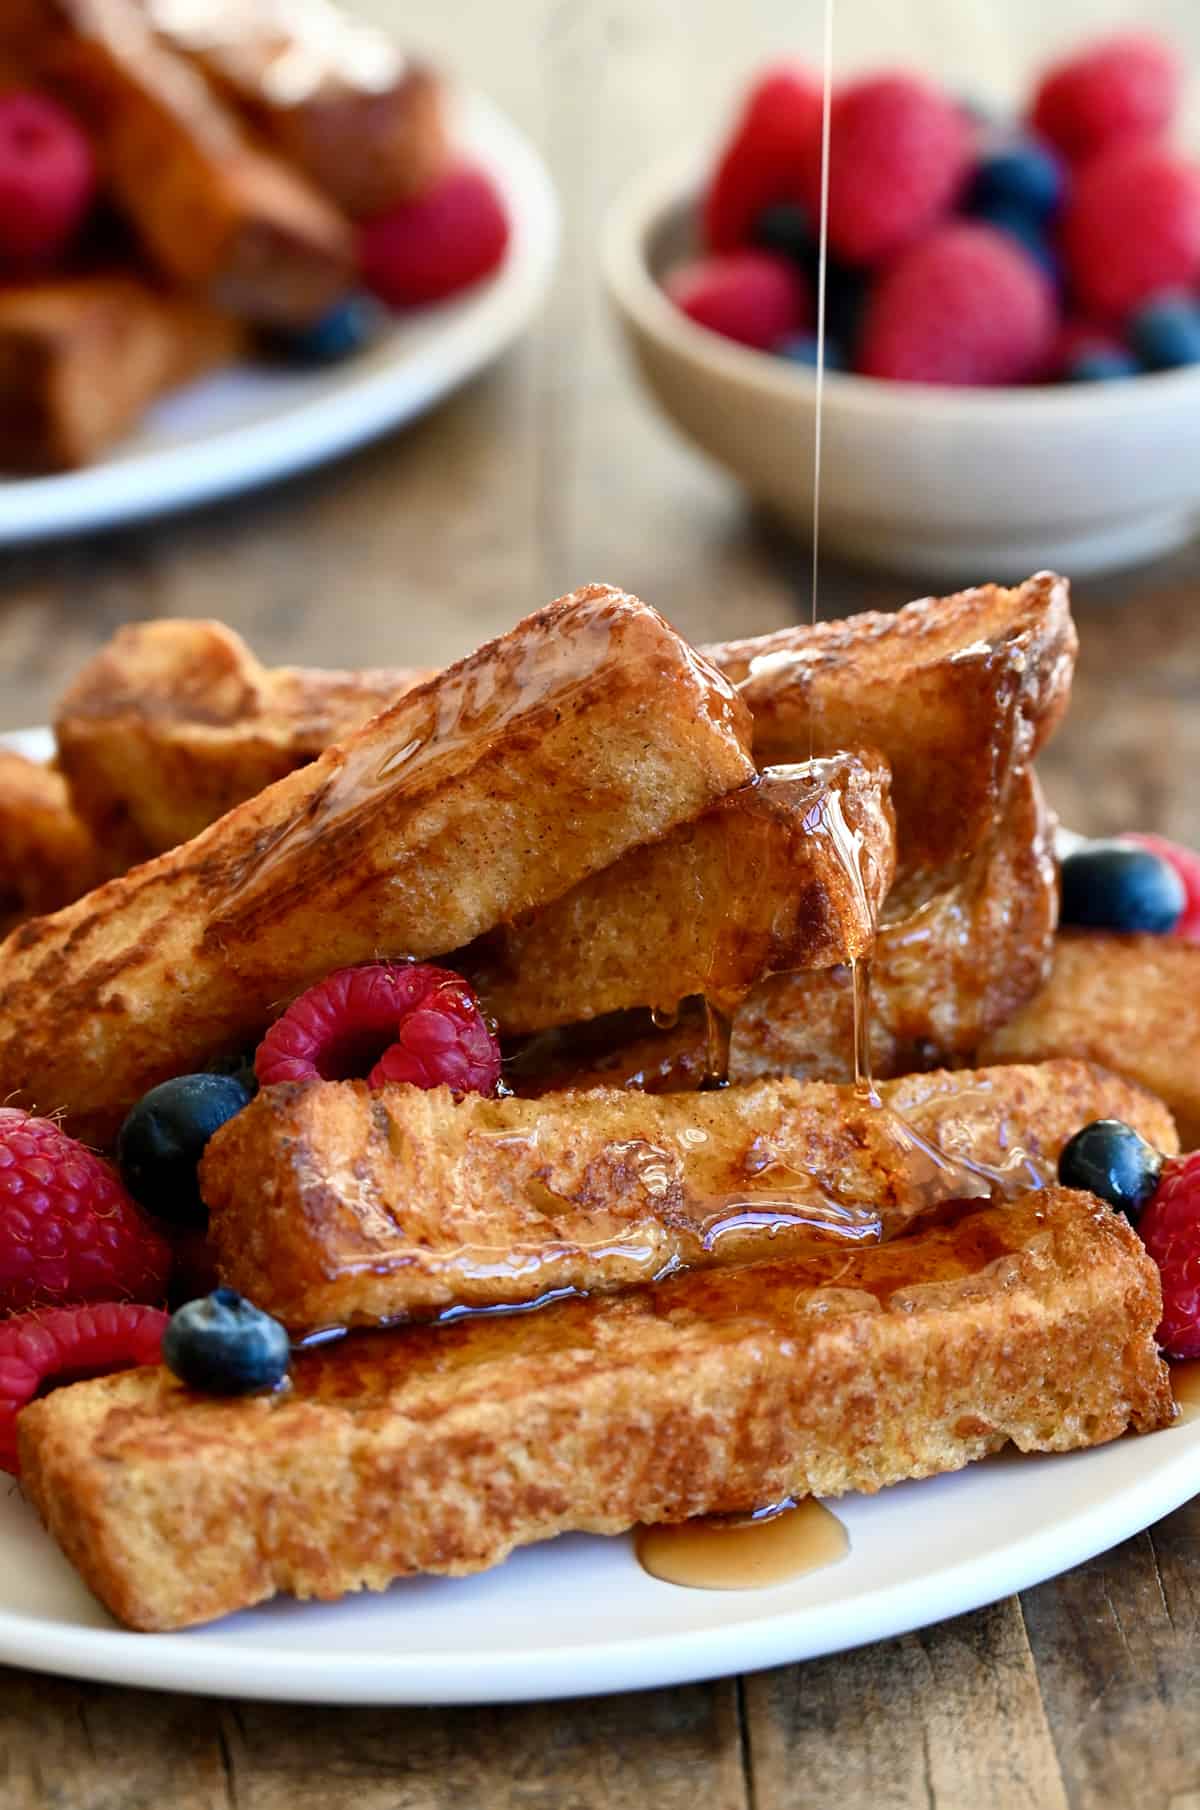 A pile of French toast sticks on a plate being drizzled with maple syrup.